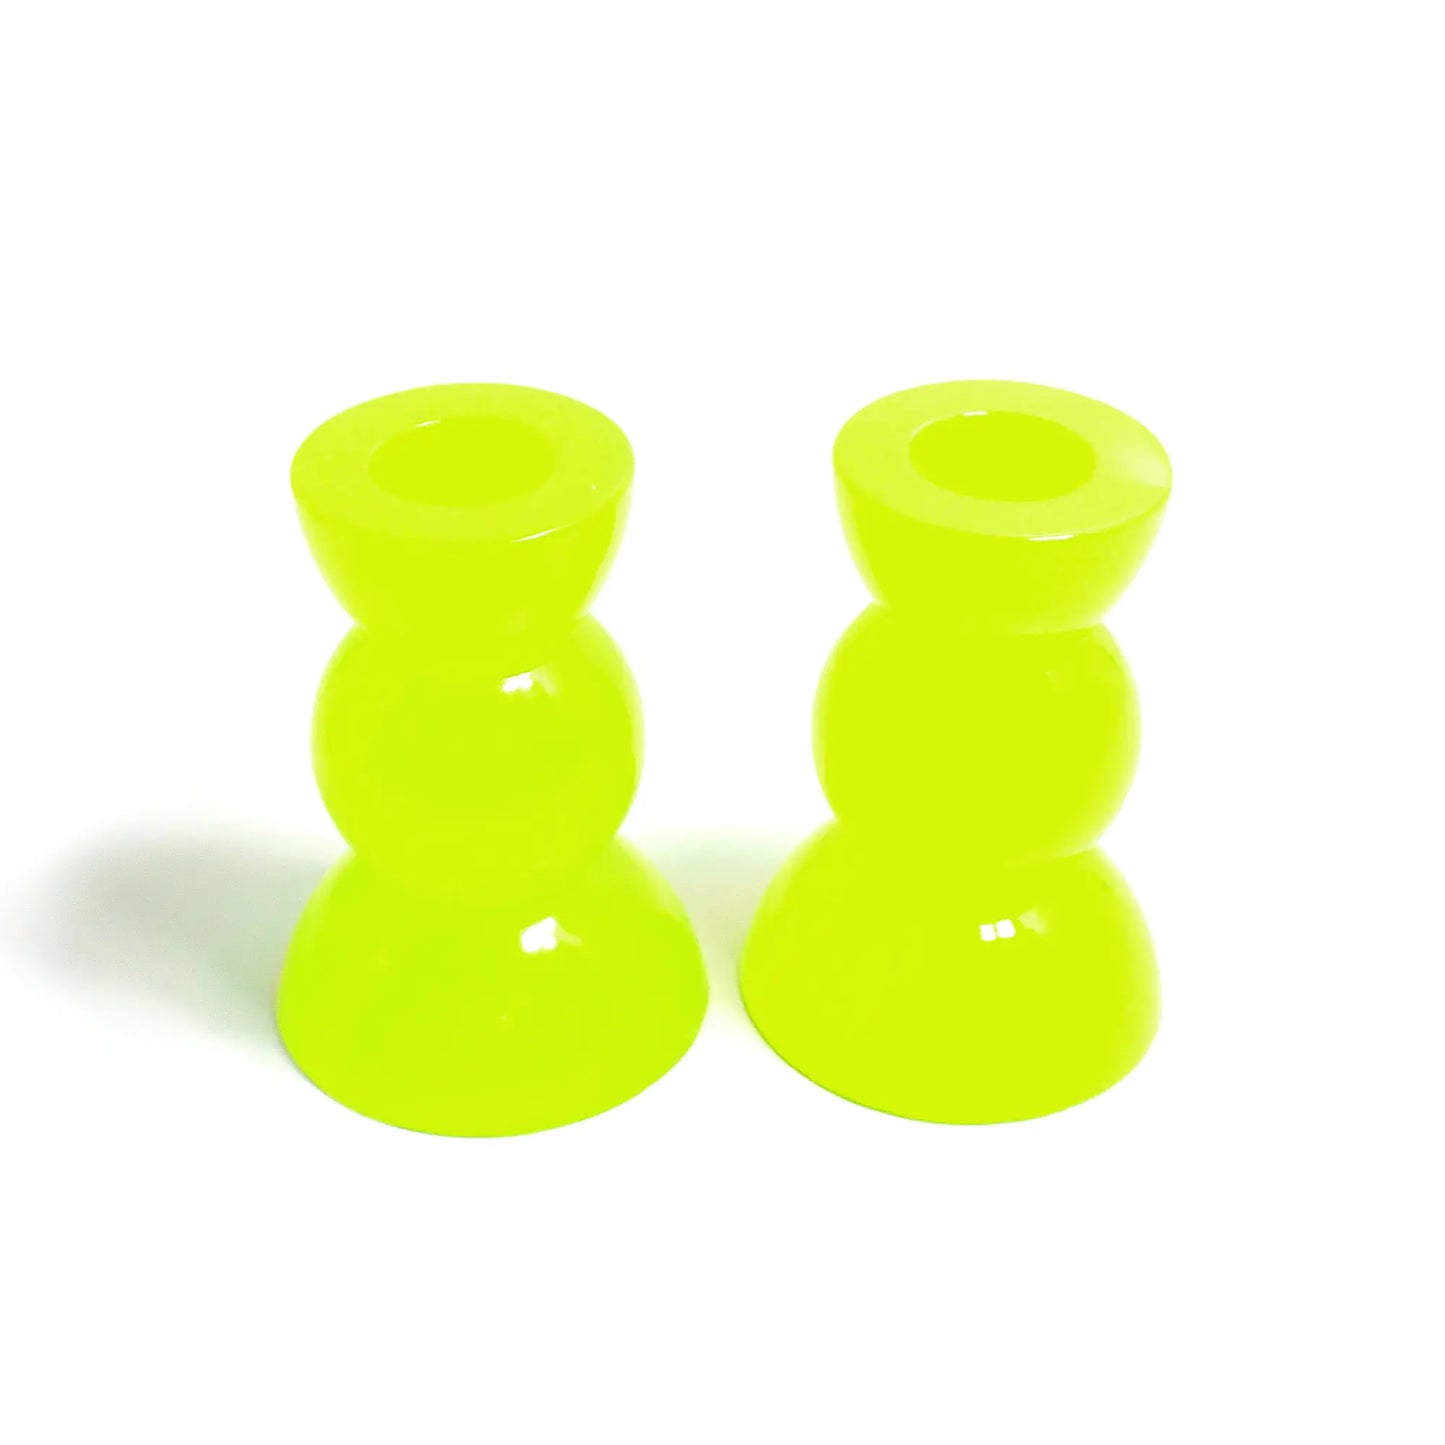 Set of Two Neon Yellow Green Resin Handmade Rounded Geometric Candlestick Holders